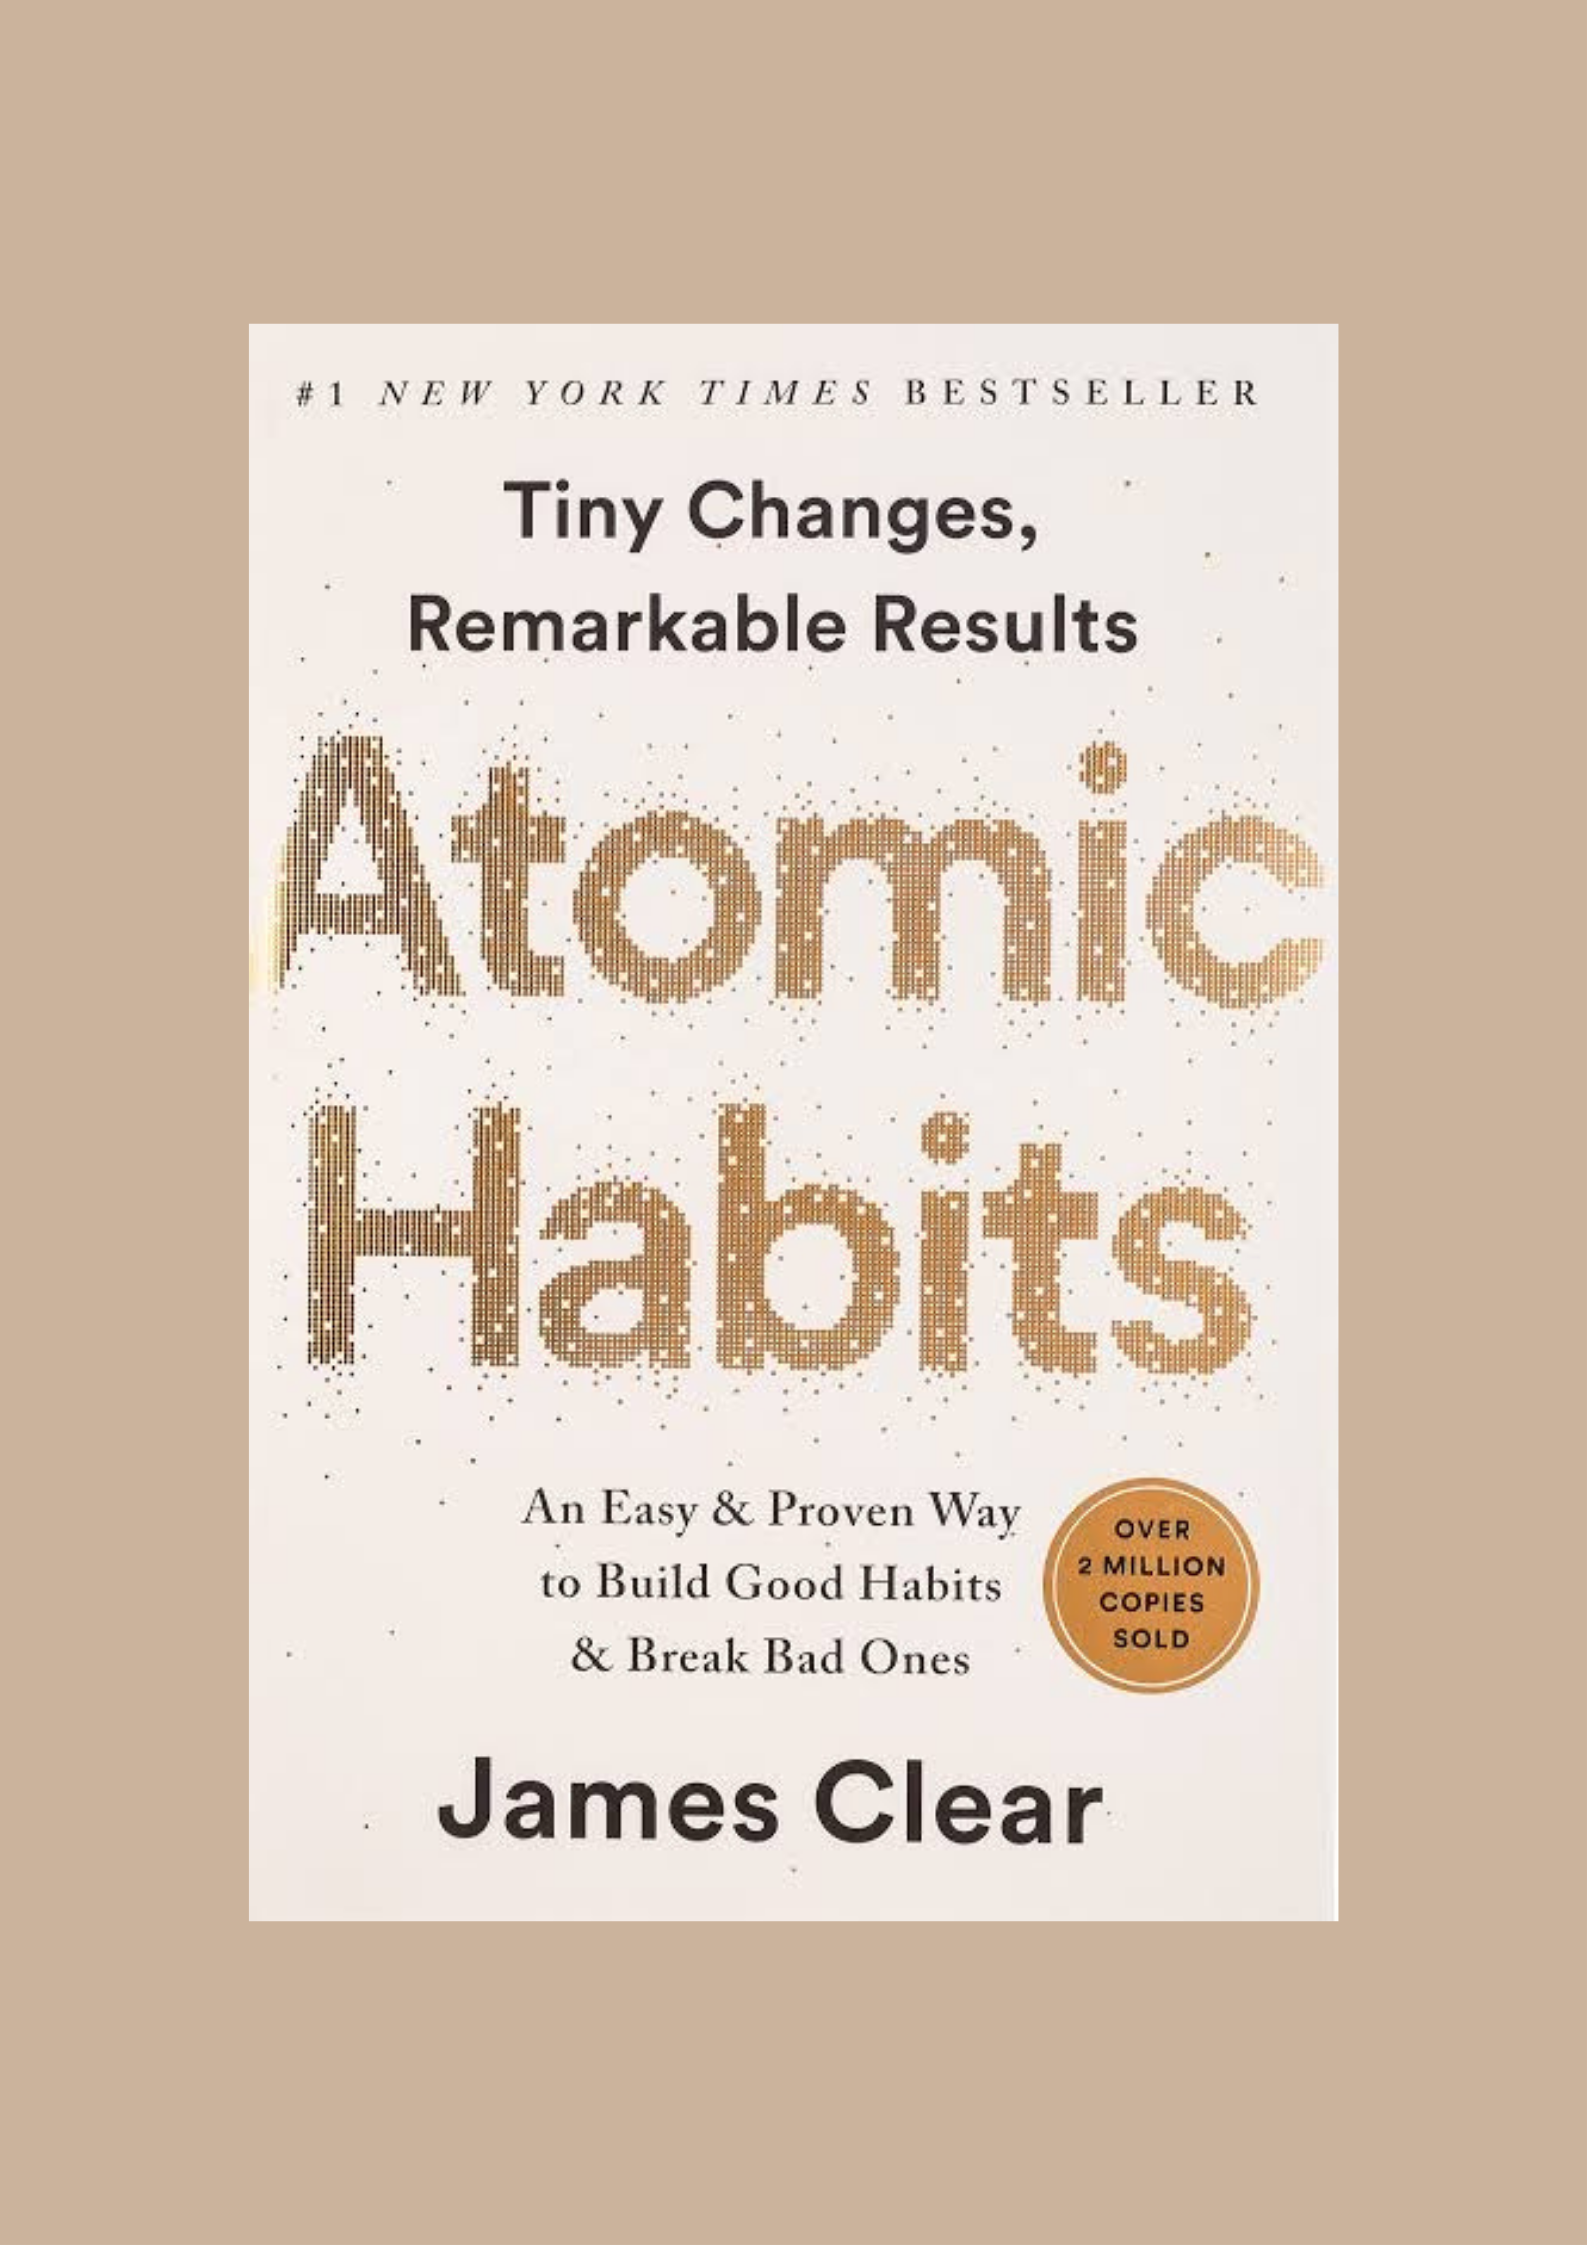 Atomic Habits by James Clear: Review by Em Readman - Glass